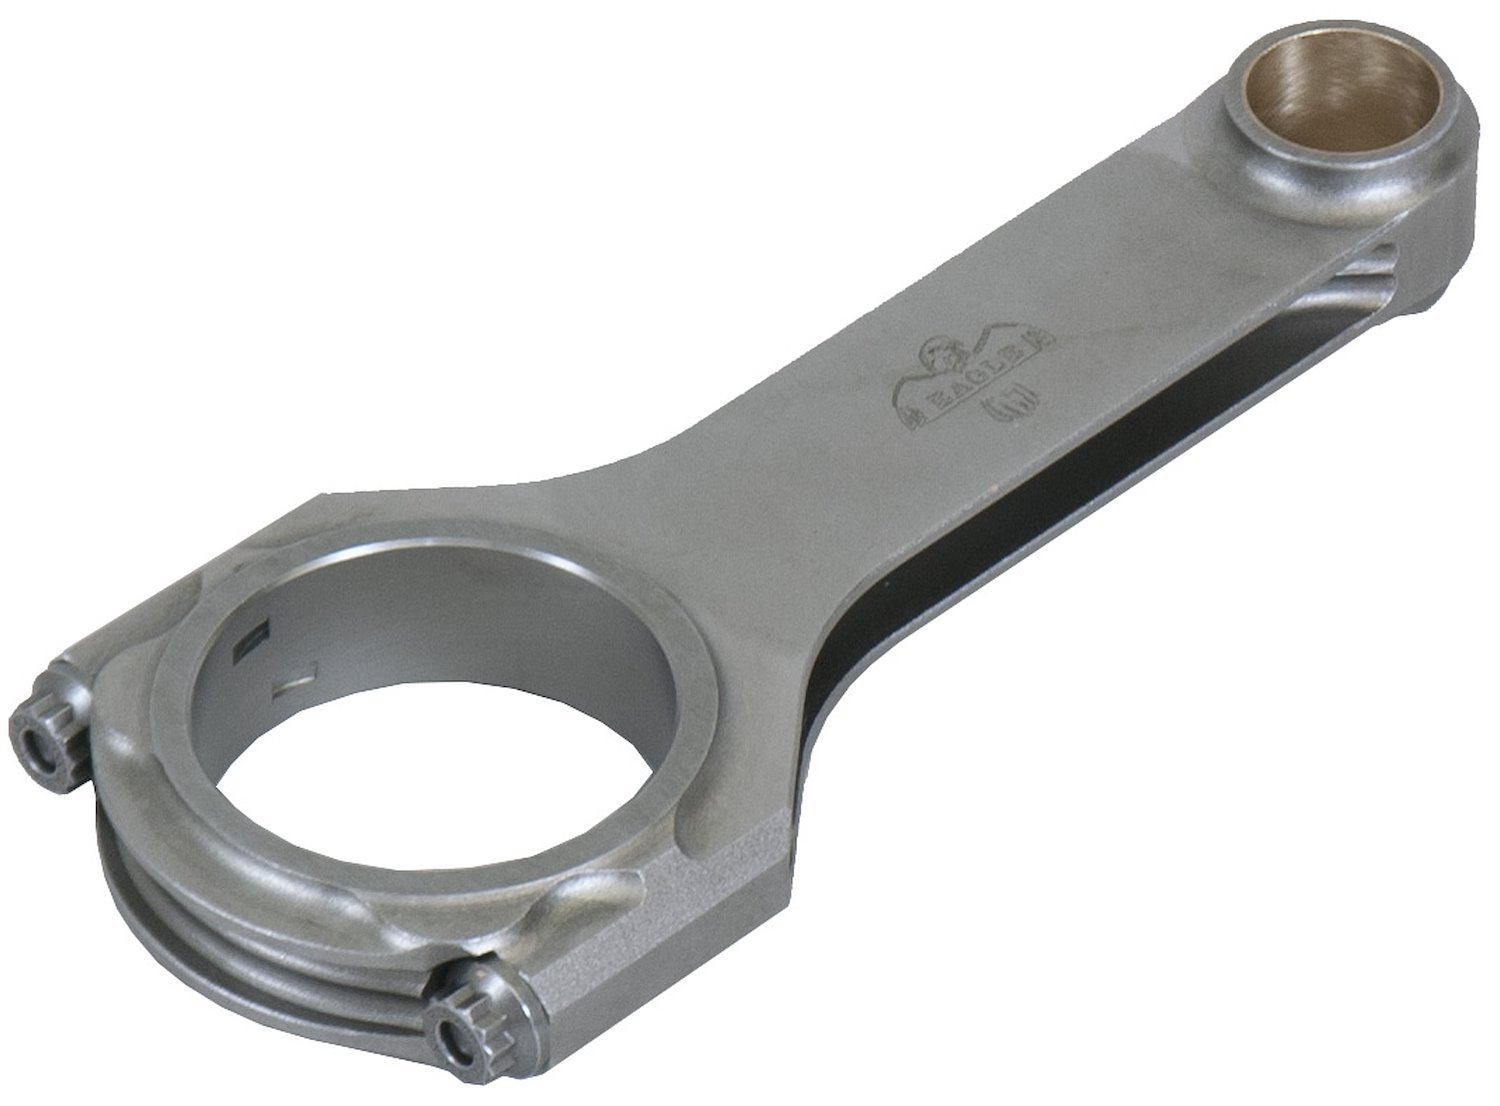 CRS6125O4D-1 H-Beam 4th Generation Design (4D) 6.125 in. Forged Steel Connecting Rod for GM Gen III LS Engines